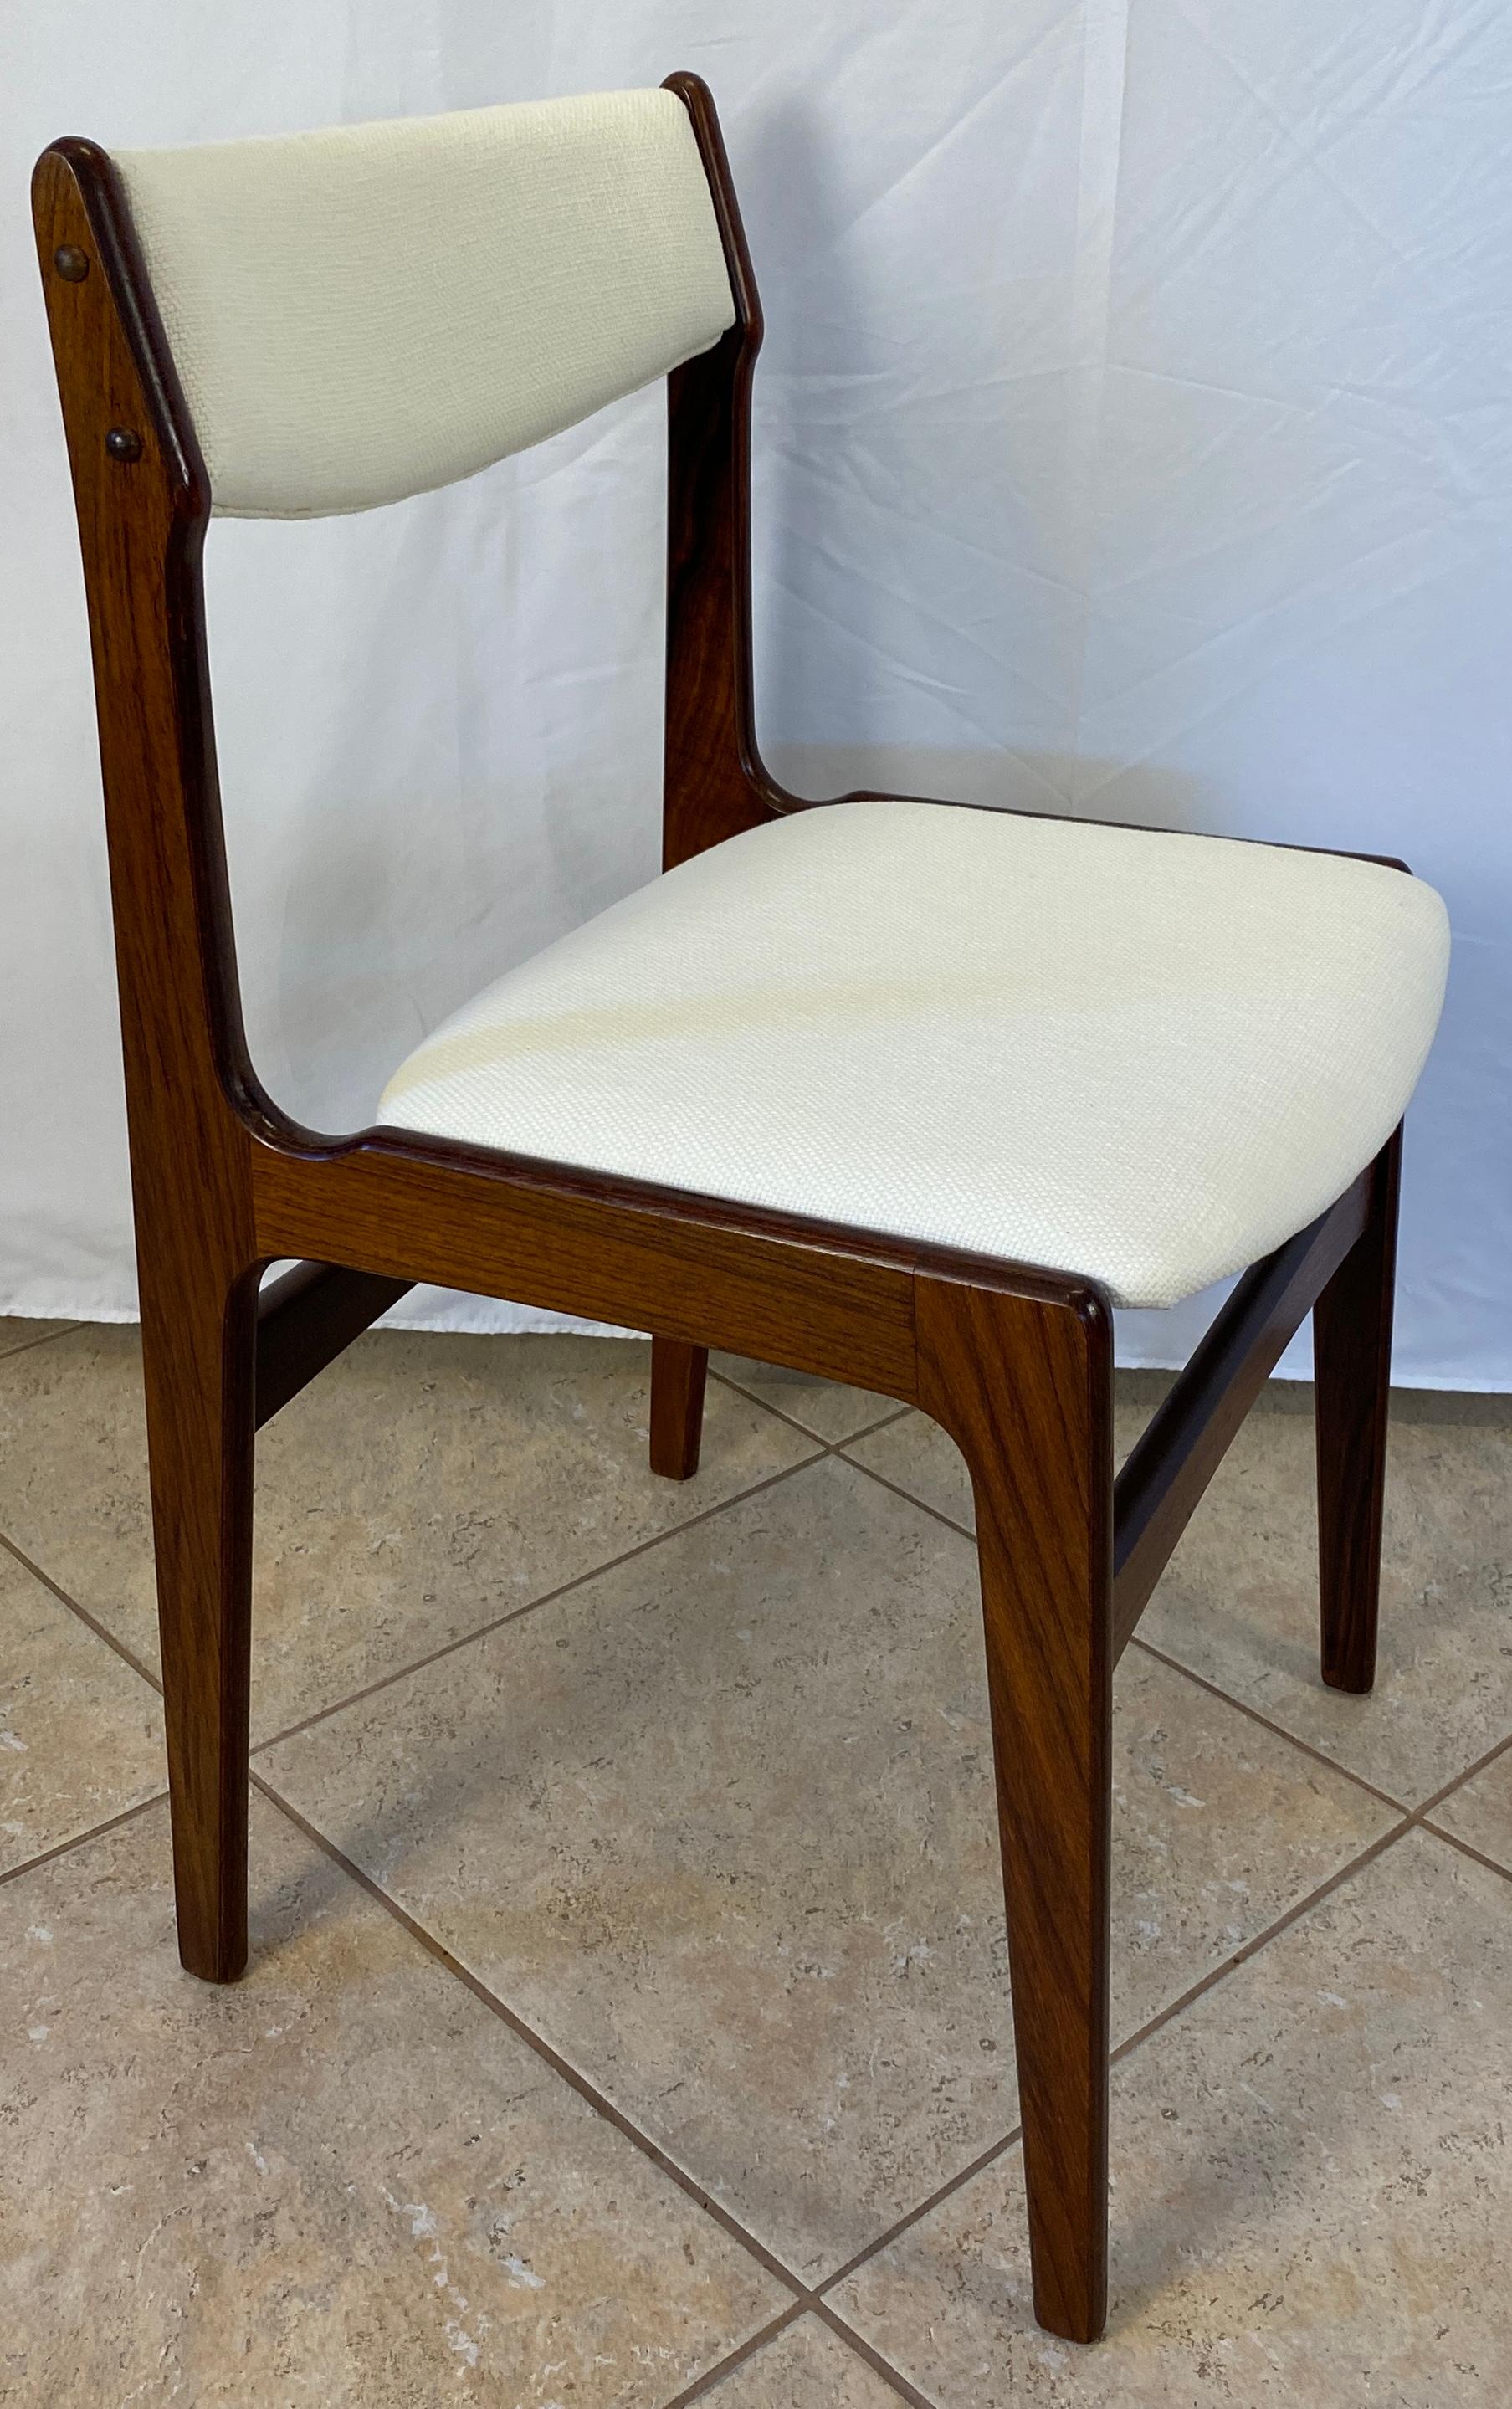 Set of 4 Mid-Century Modern Danish Dining Room Chairs  In Good Condition For Sale In Miami, FL